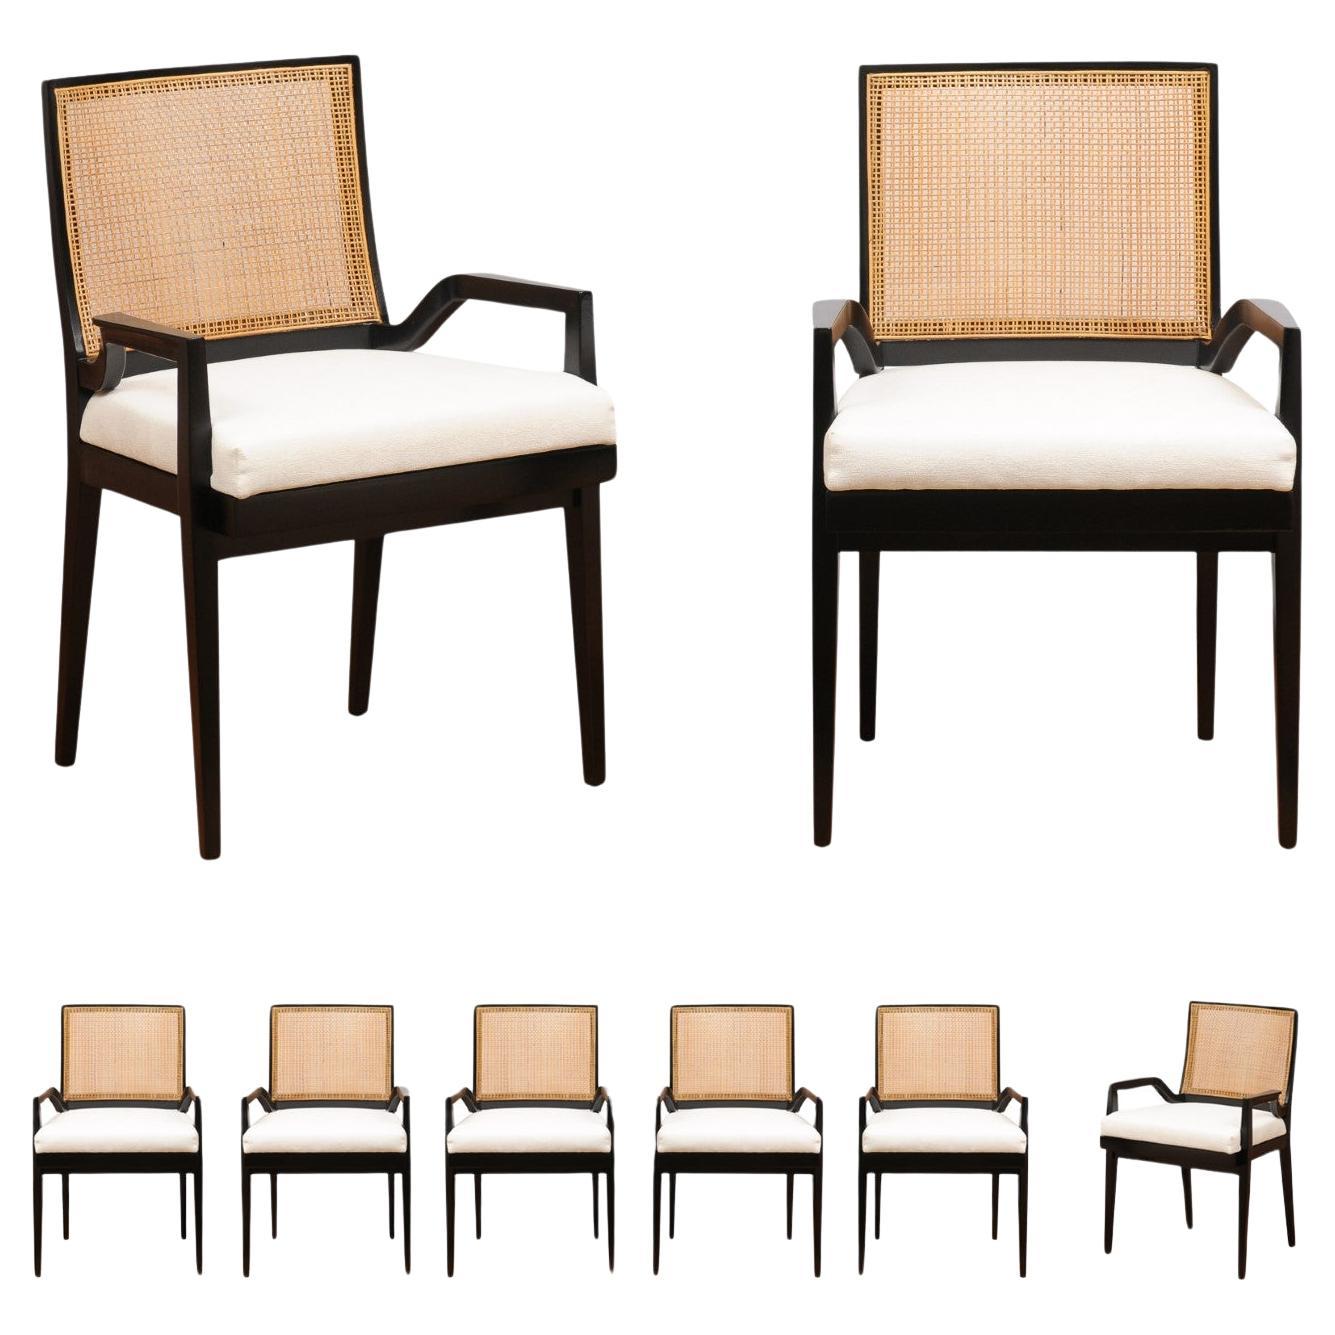 ALL ARMS Set of 8 Black Lacquer Cane Dining Chairs by Michael Taylor, circa 1960 For Sale